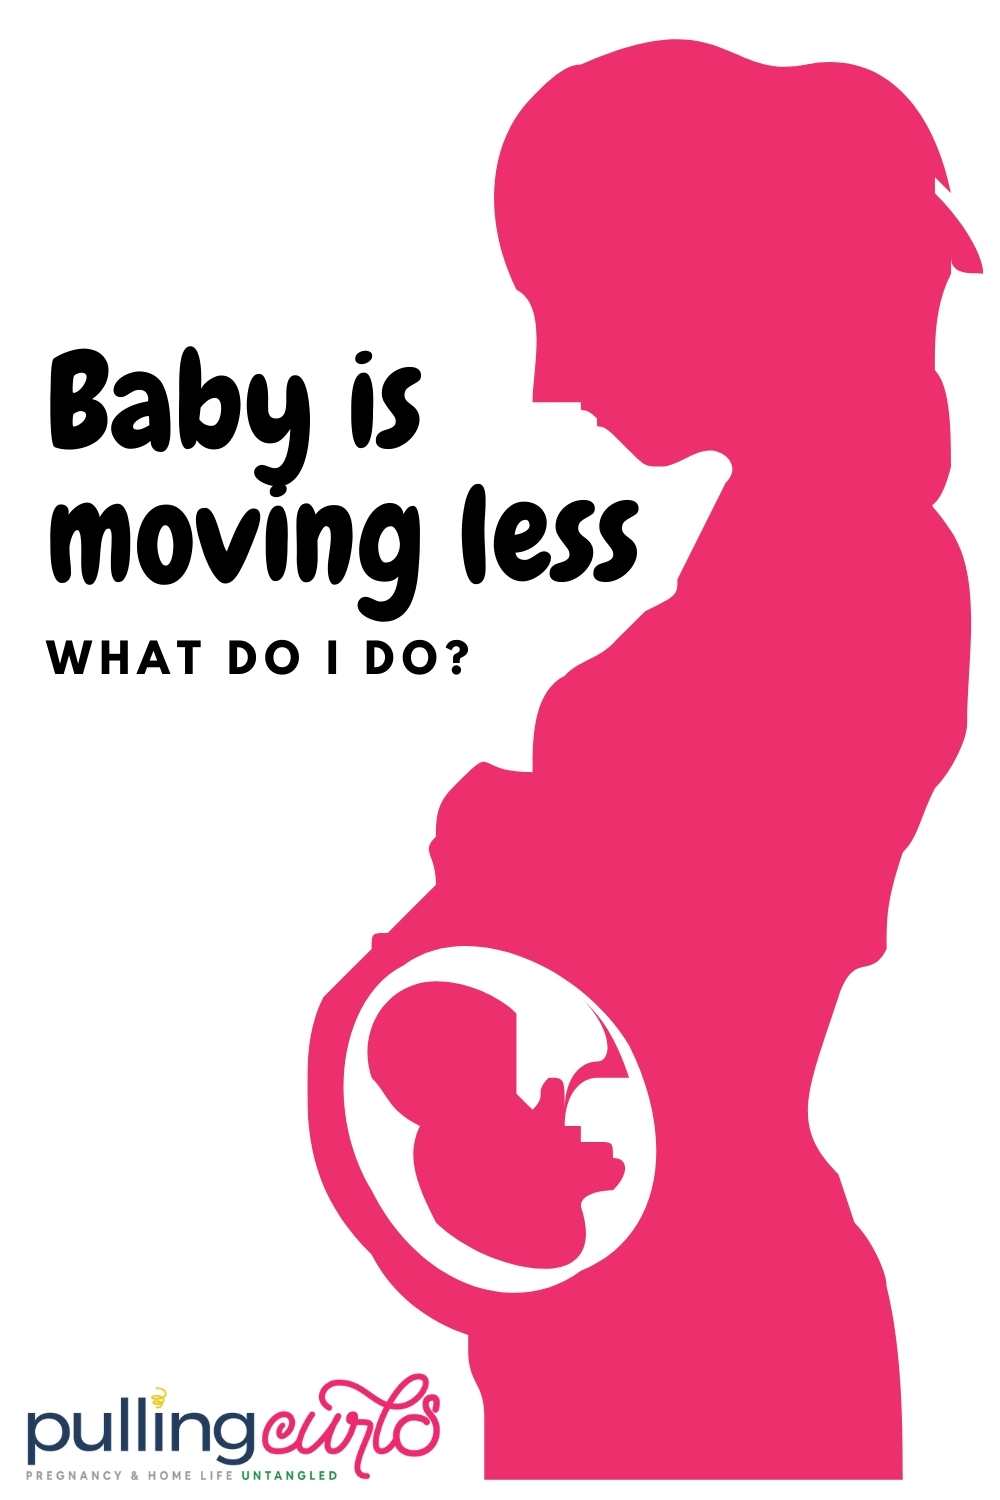 If you are pregnant and you are noticing a decrease in your baby's movements, it is important to seek help right away. Going to the hospital can help you get the medical care you and your baby need. This article will discuss the signs and symptoms of decreased fetal movement, when to go to the hospital, what to expect when you get there, and how to cope with worry and stress. via @pullingcurls